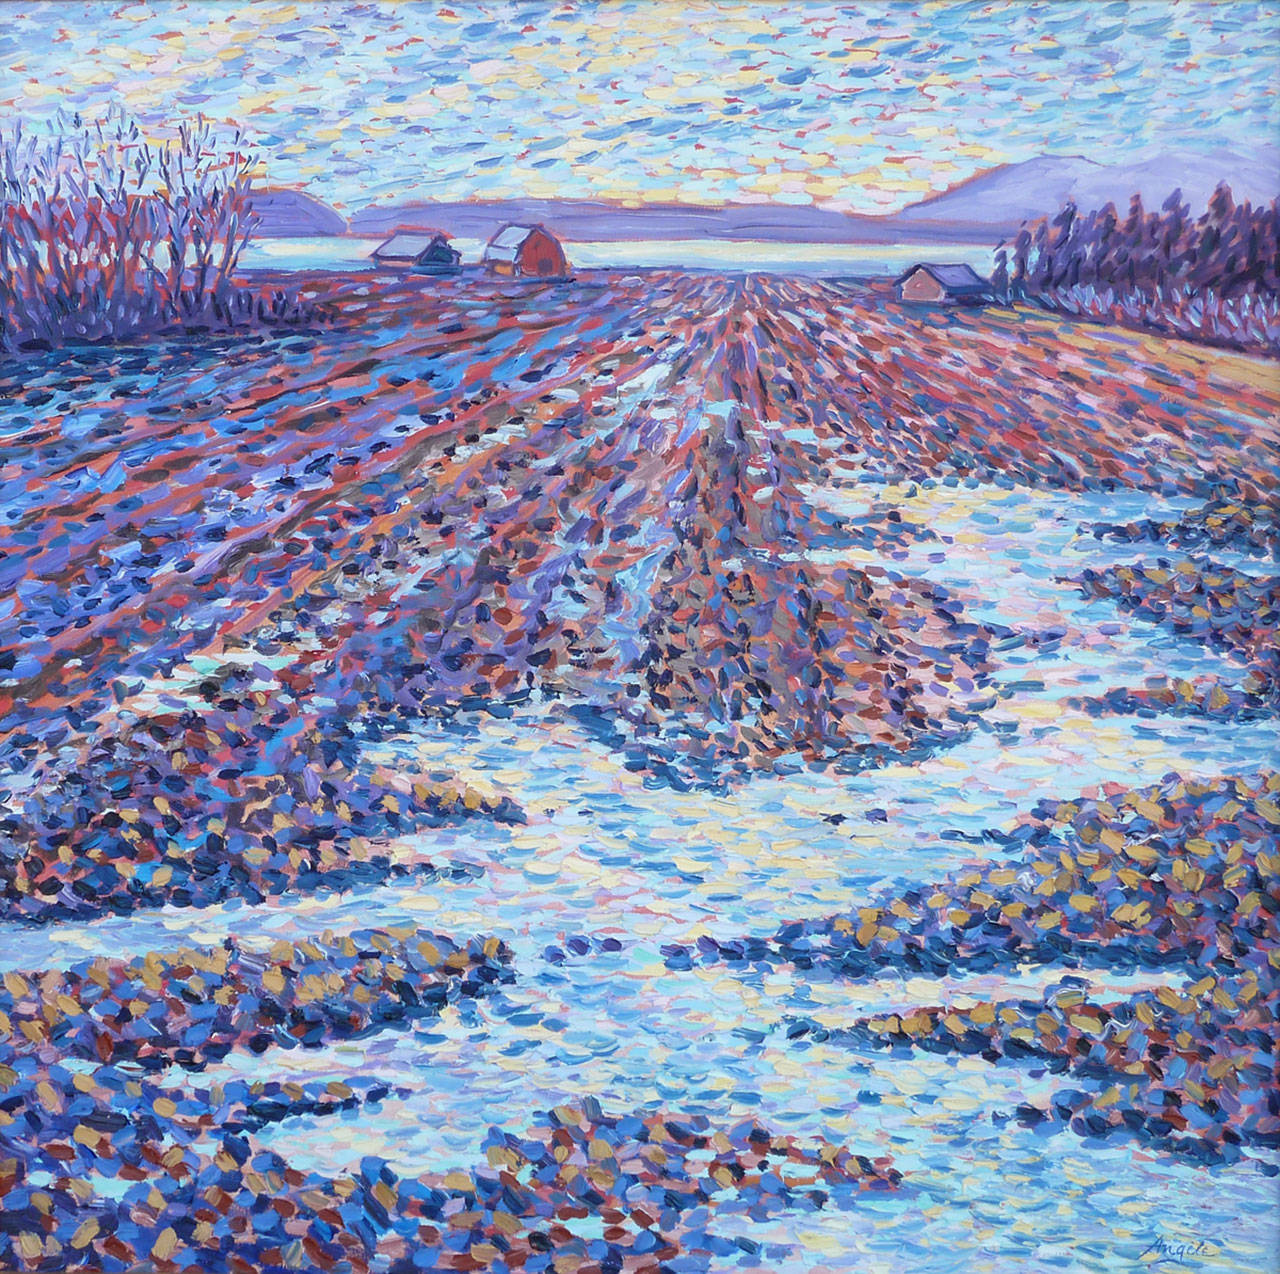 “Wintery Reflections” by Angele Woolery. Oil on canvas at Rob Schouten Gallery, Langley.